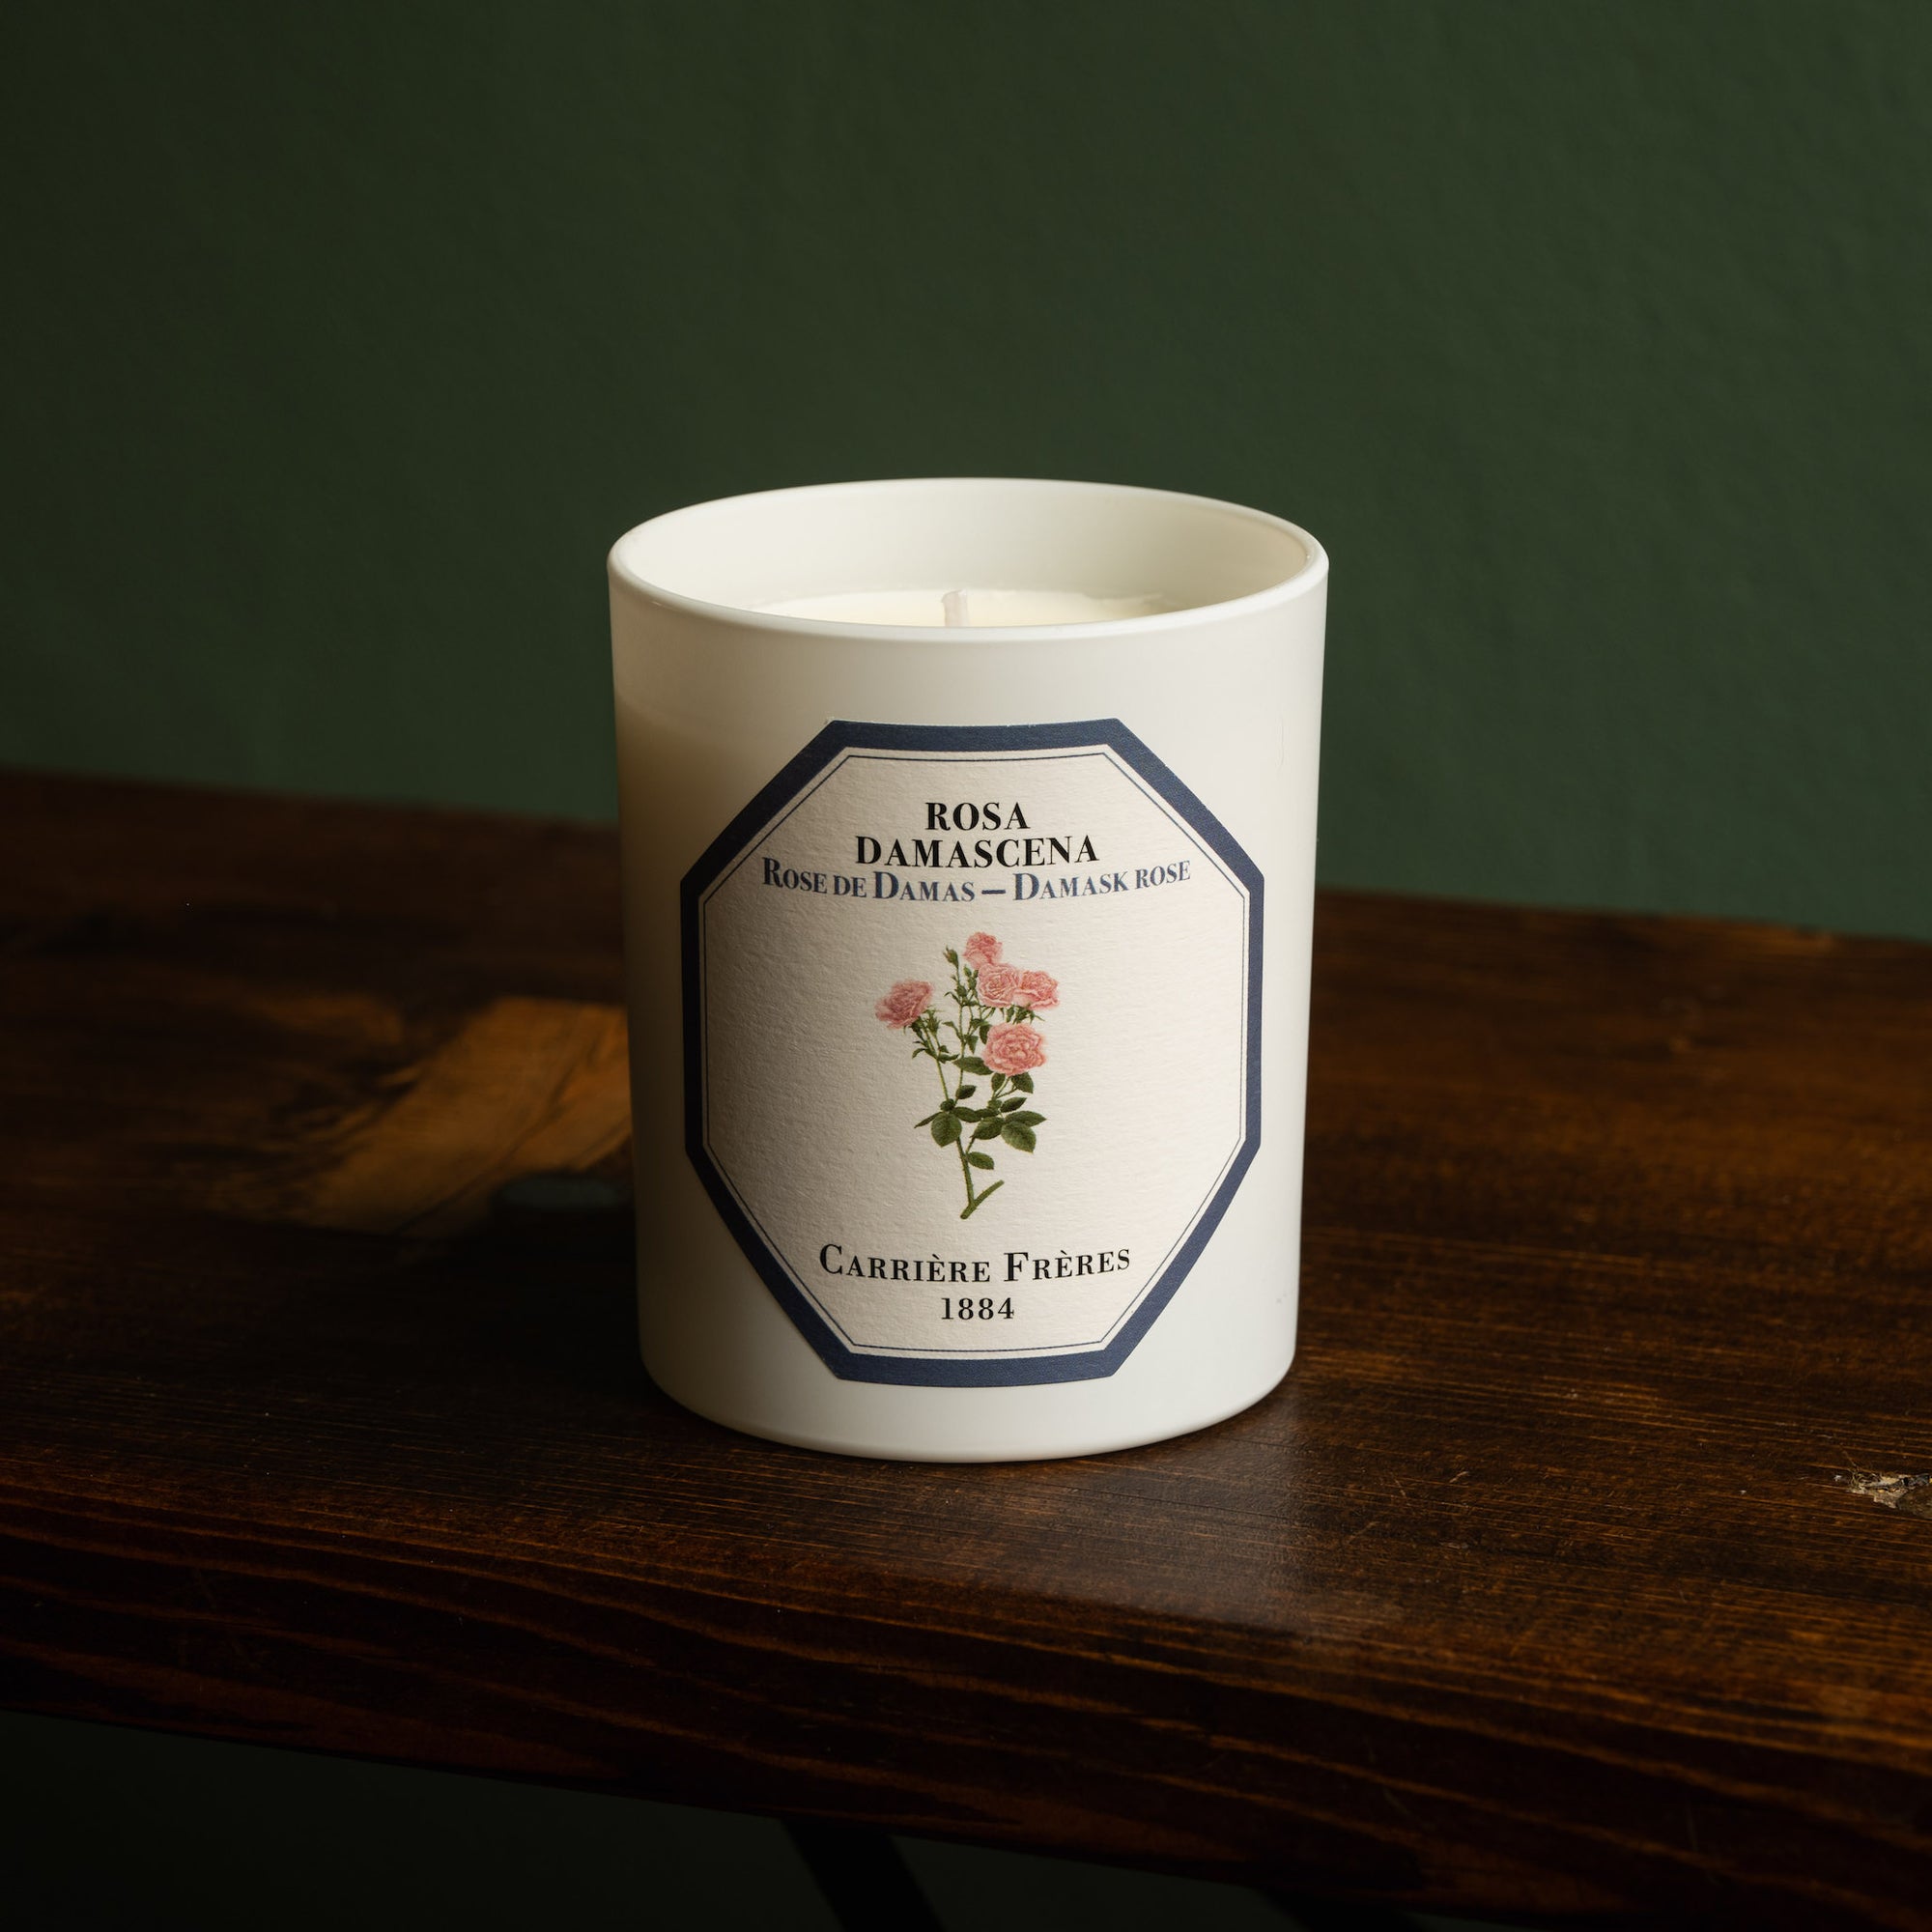 Carriere Freres Damask Rose scented candle